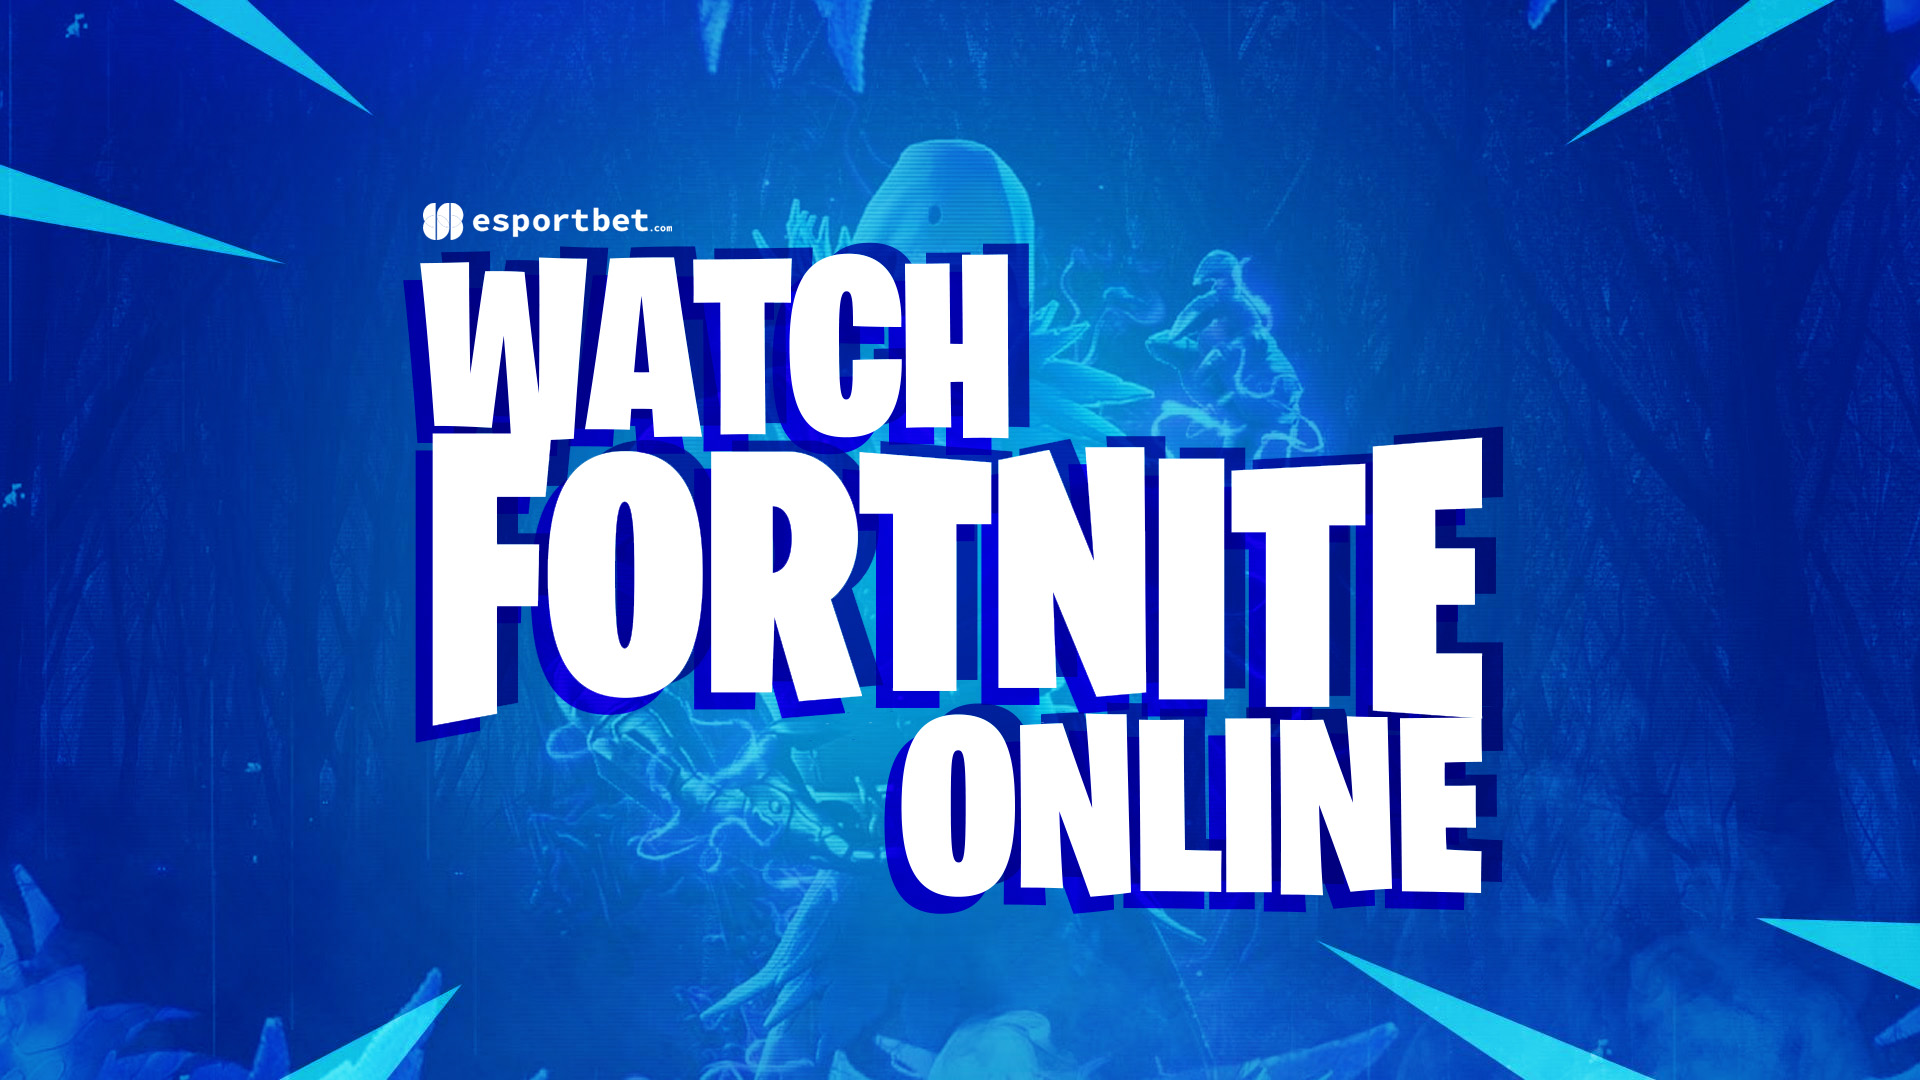 How to watch Fortnite esports online